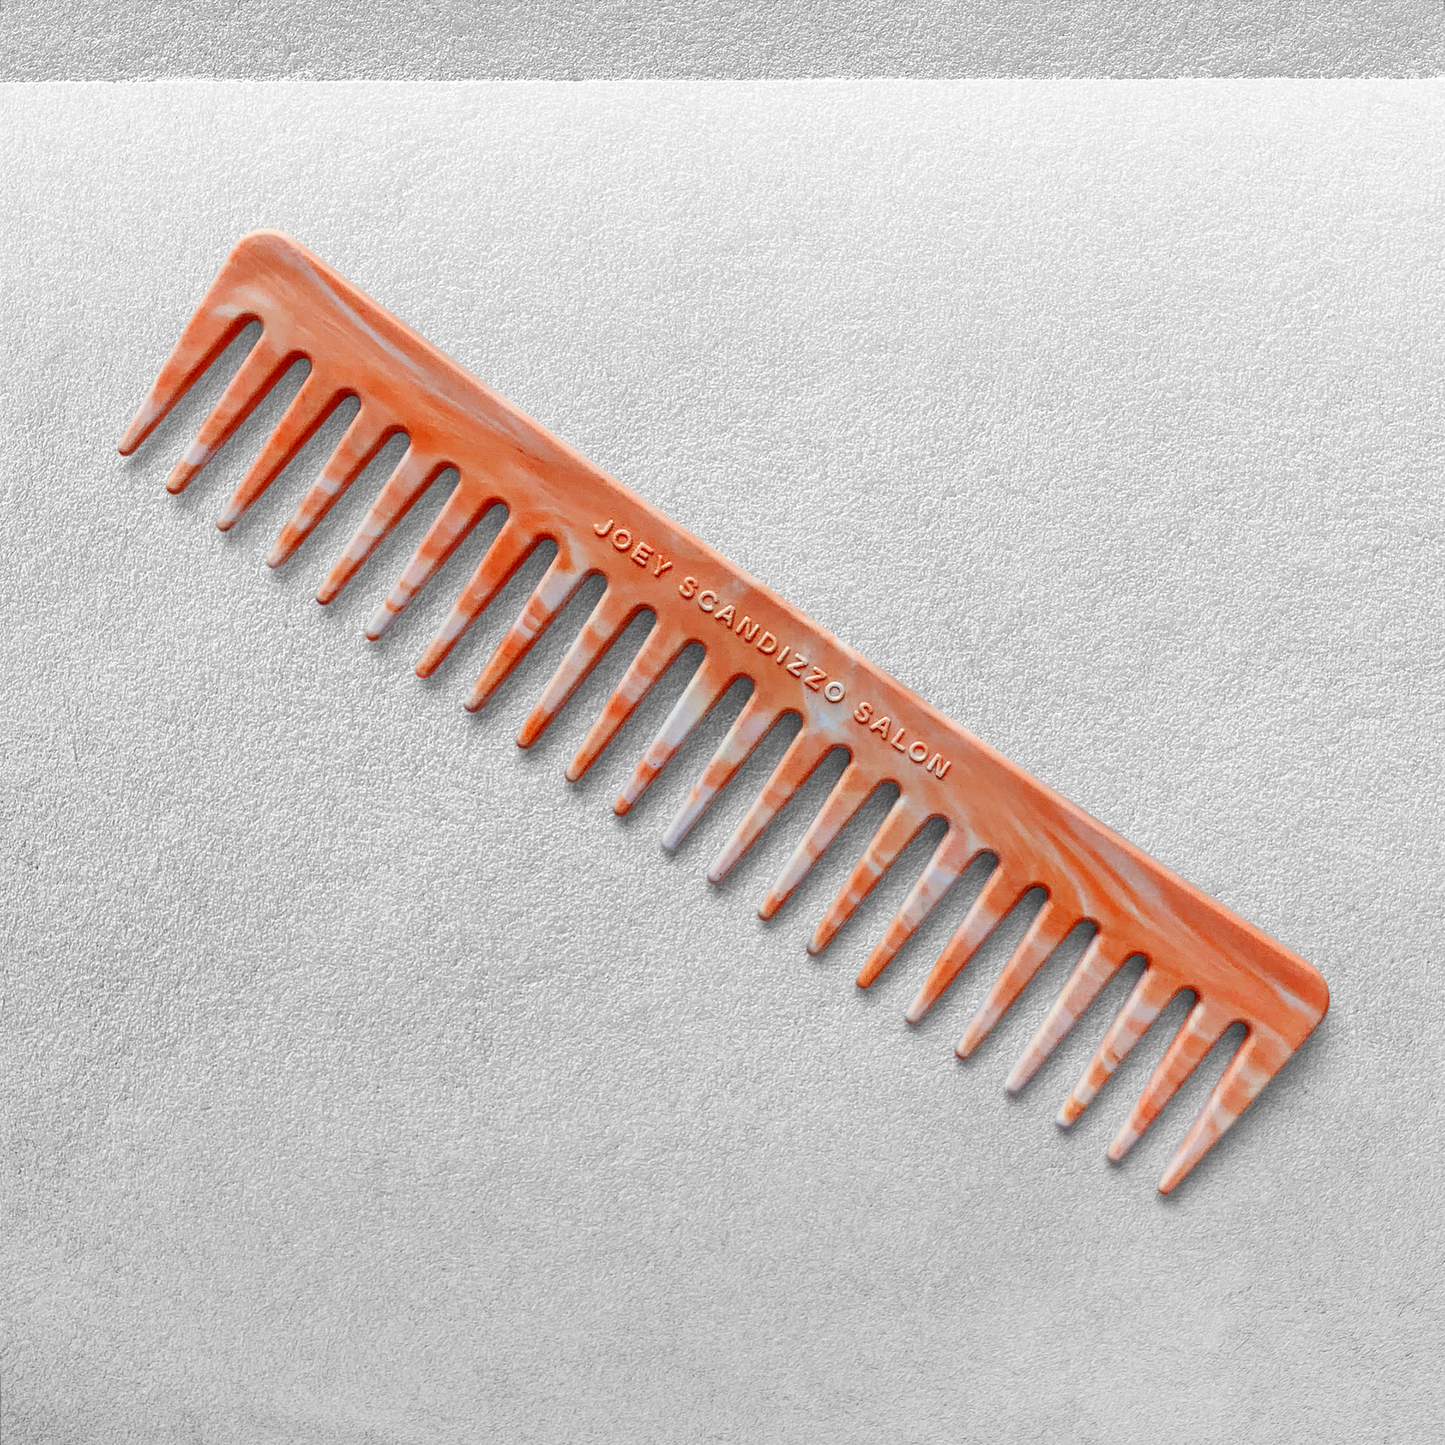 100% reclaimed / recycled plastic - wide tooth detangling comb made from bottle tops / caps